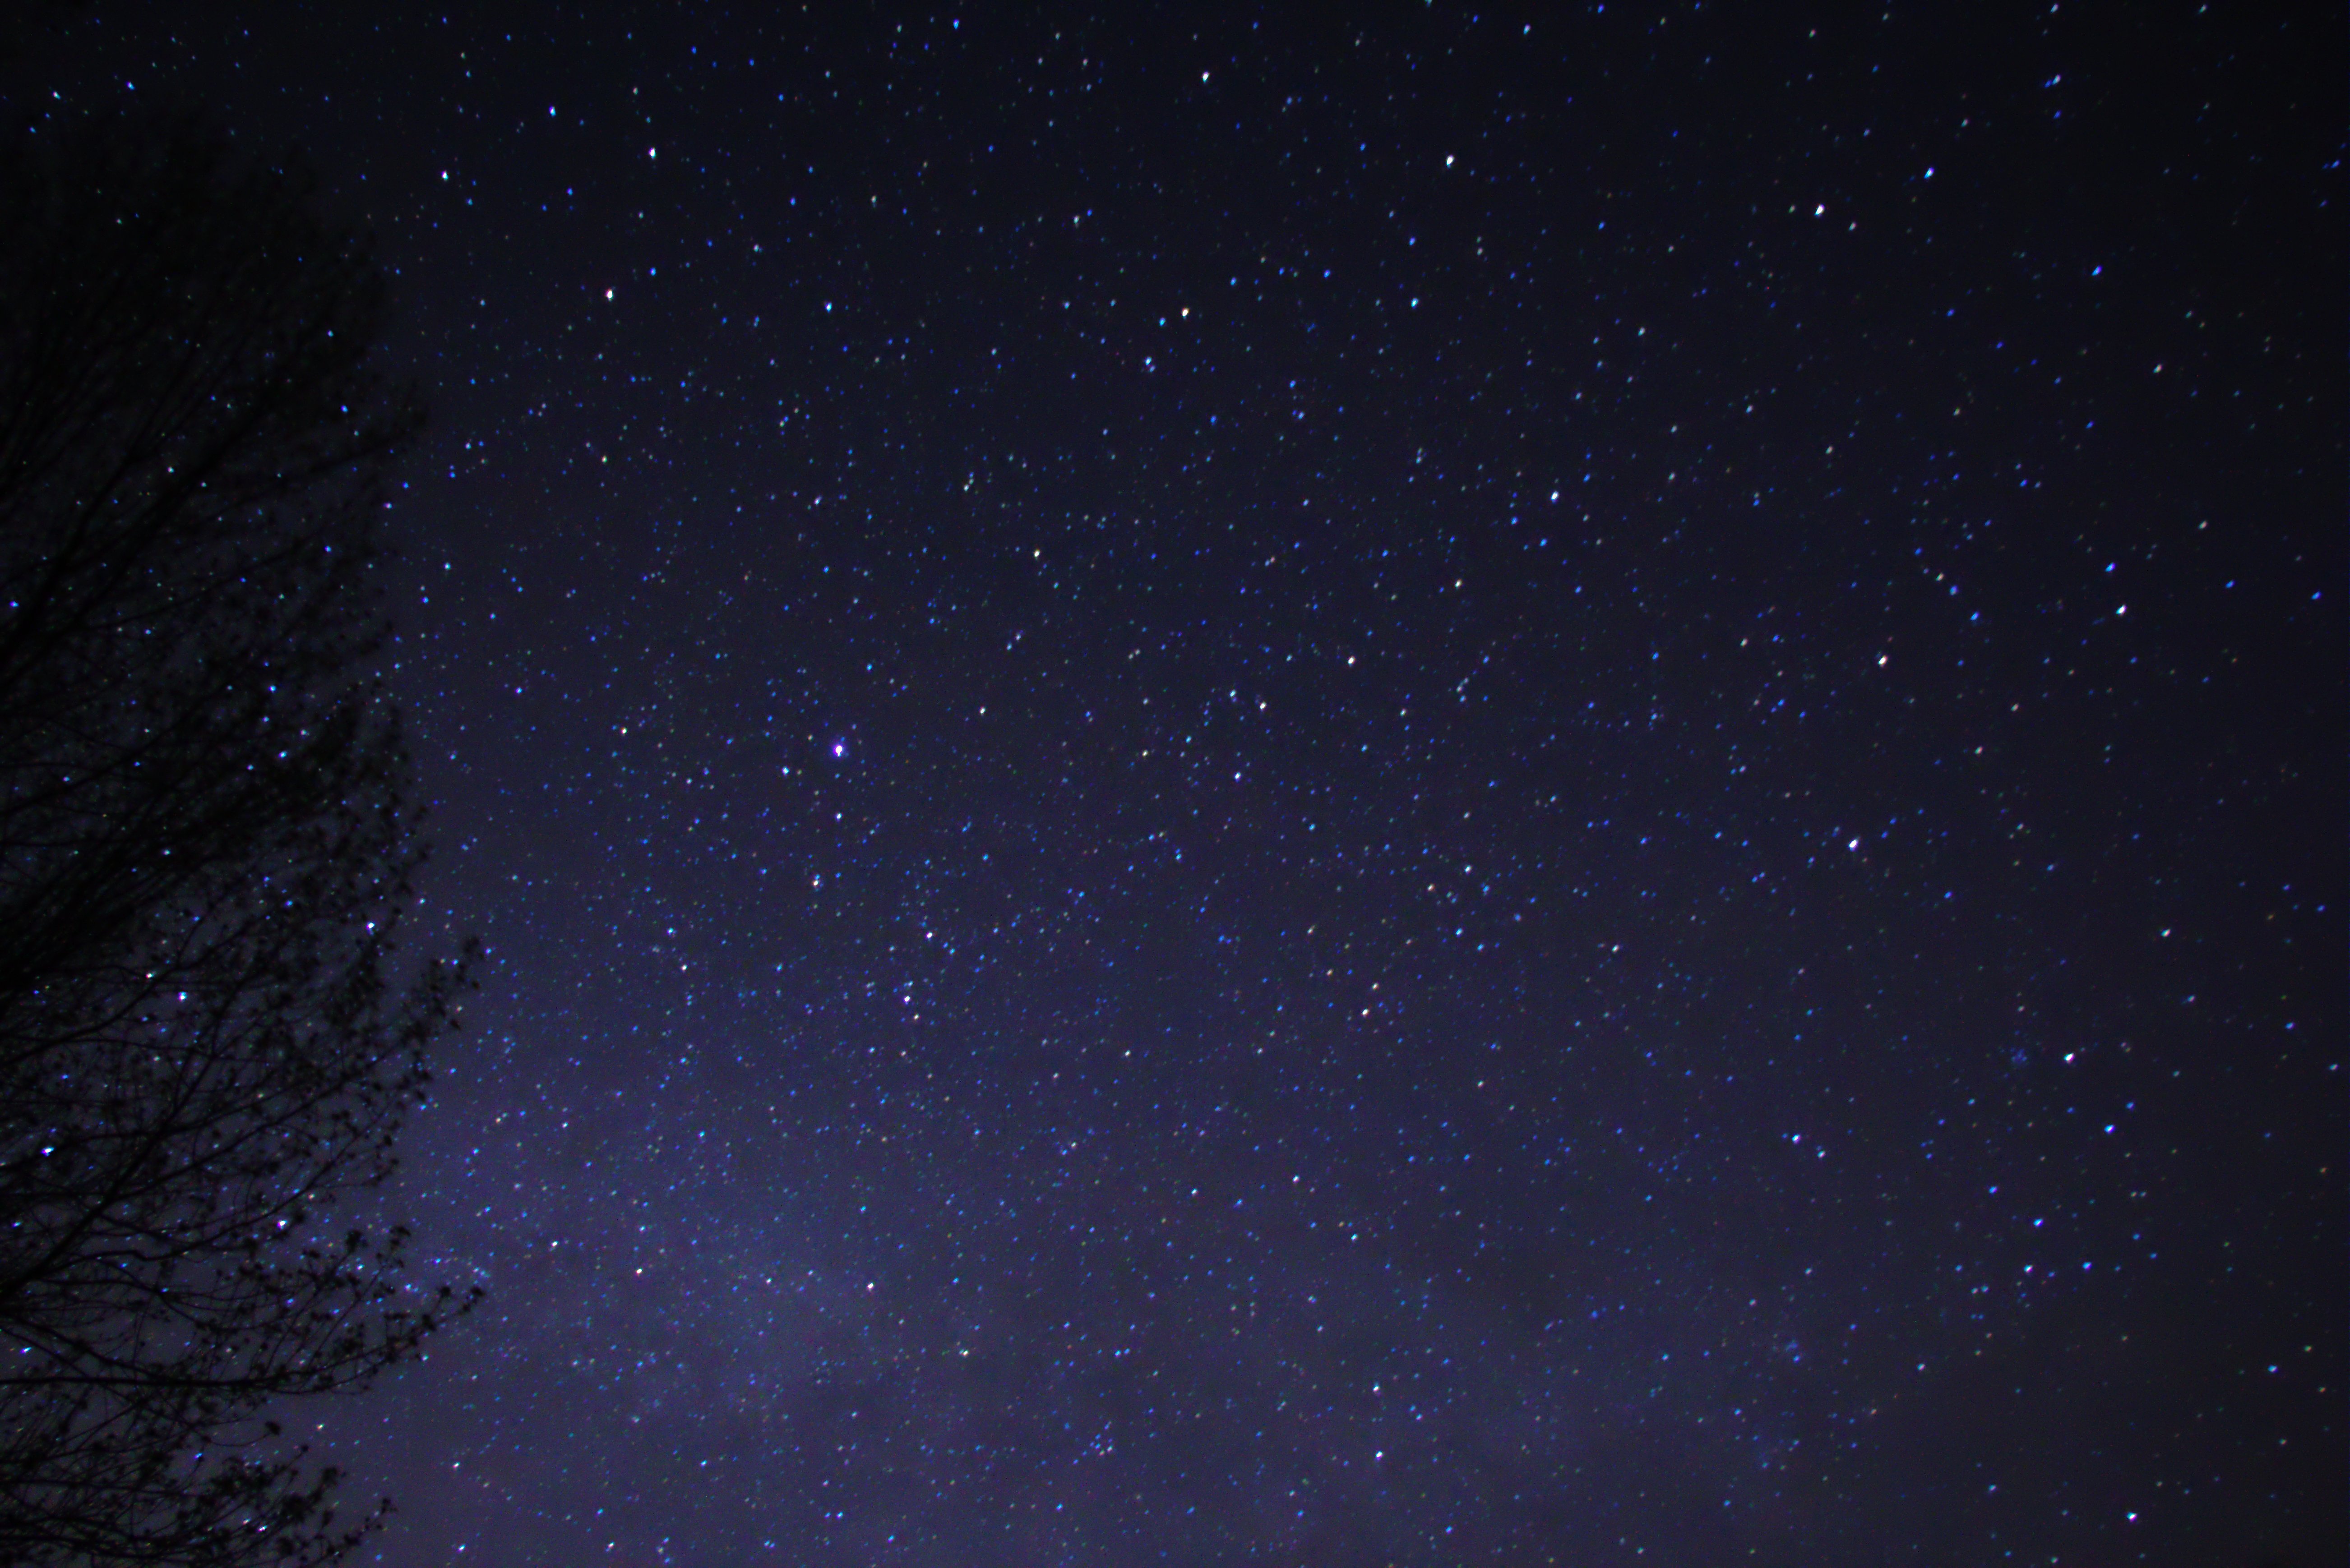 Nighttime sky with stars and a tangled web